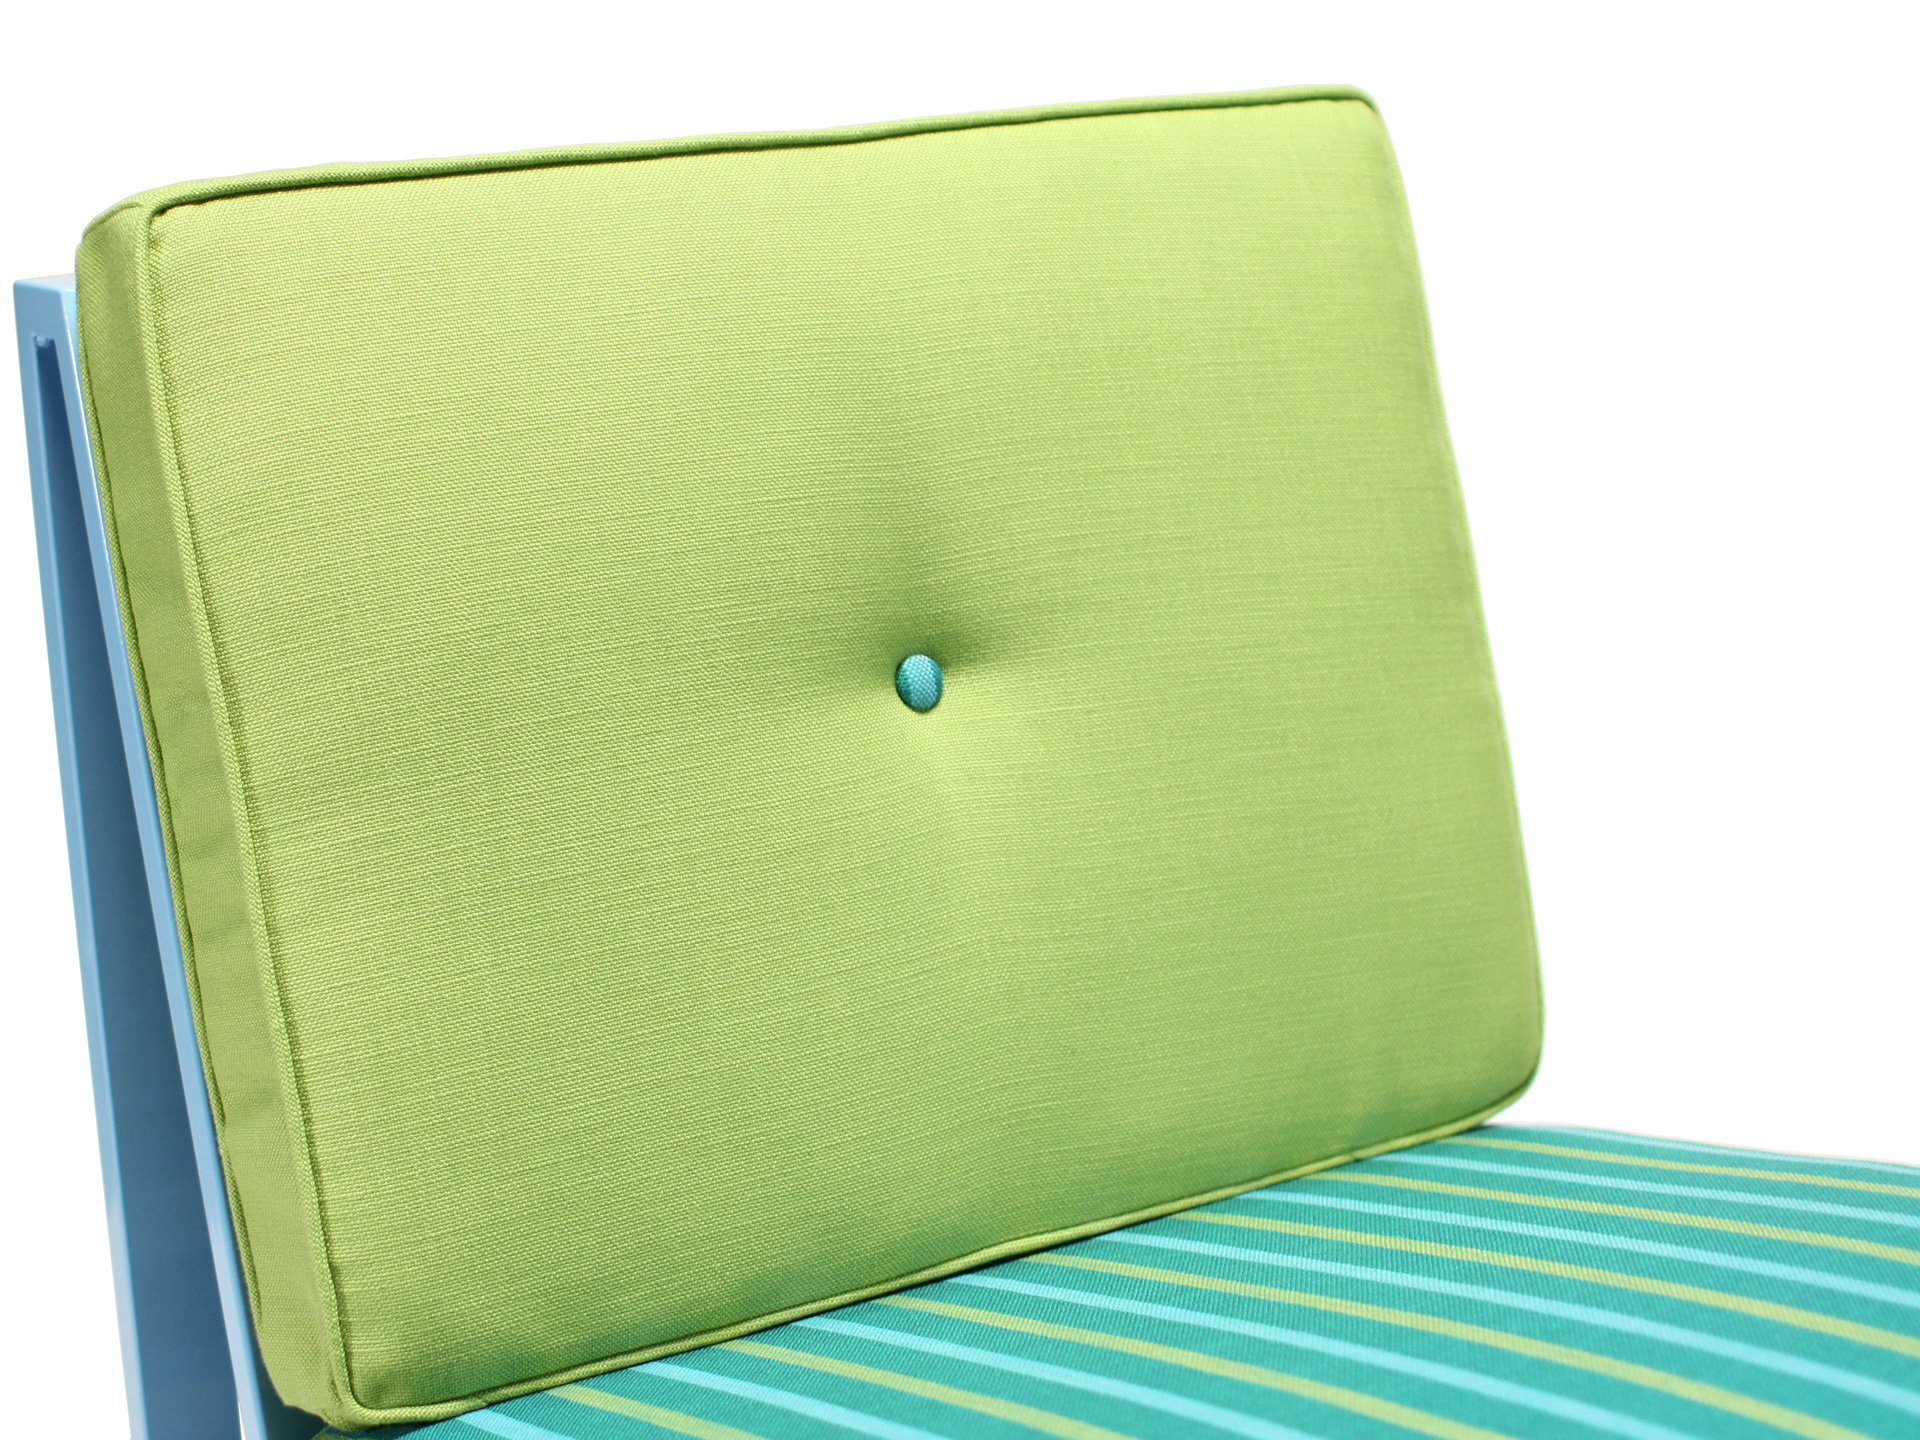 Detail of Del Calle chair cushion back